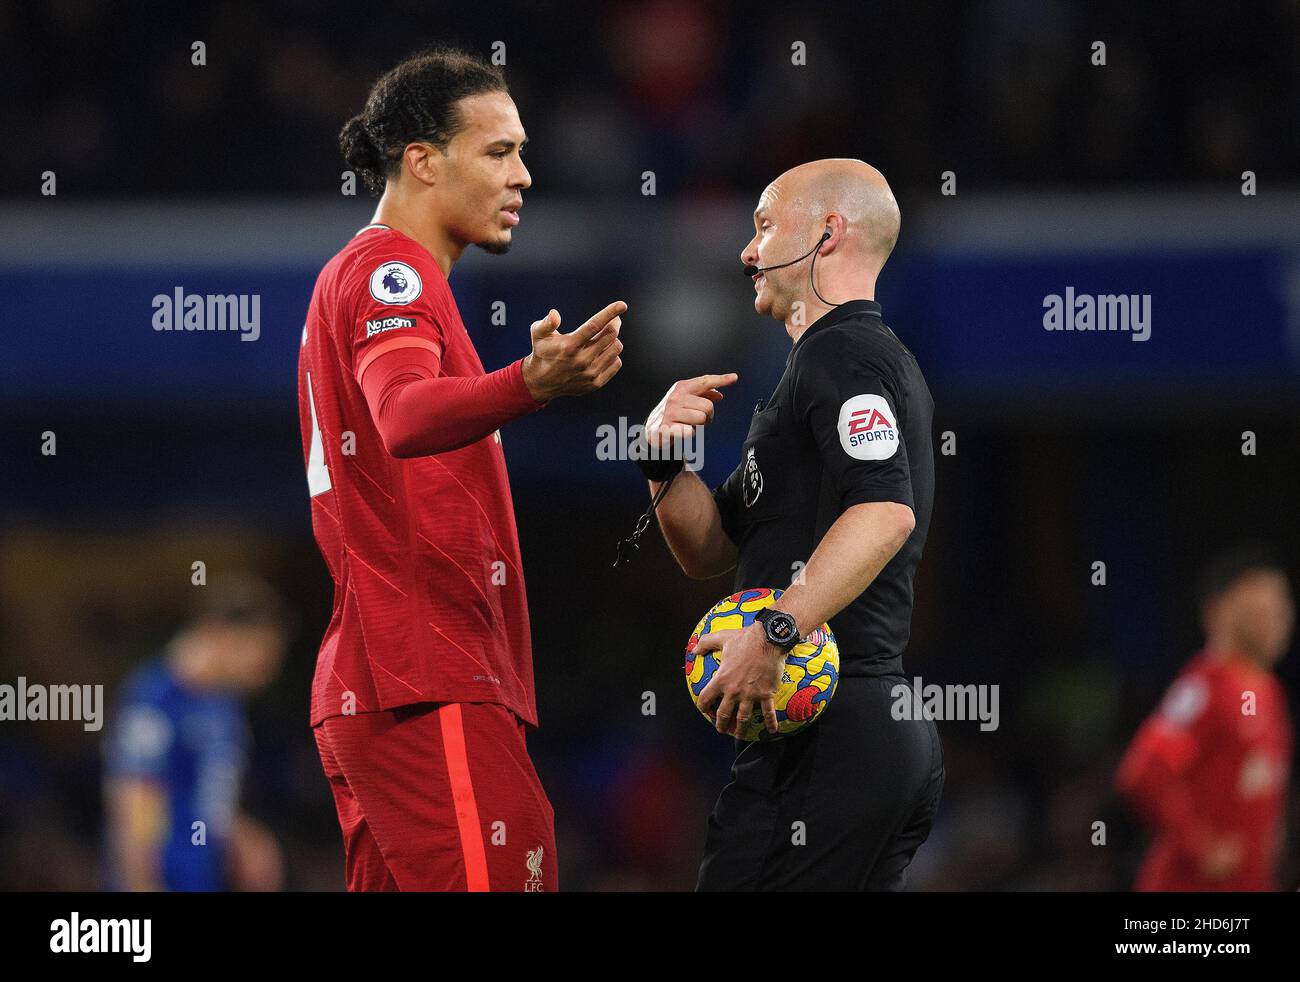 02 January - Chelsea v Liverpool - Premier League - Stamford Bridge  Virgil Van Dijk talks with Referee Anthony Taylor during the Premier League match at Stamford Bridge Picture Credit : © Mark Pain / Alamy Live News Stock Photo